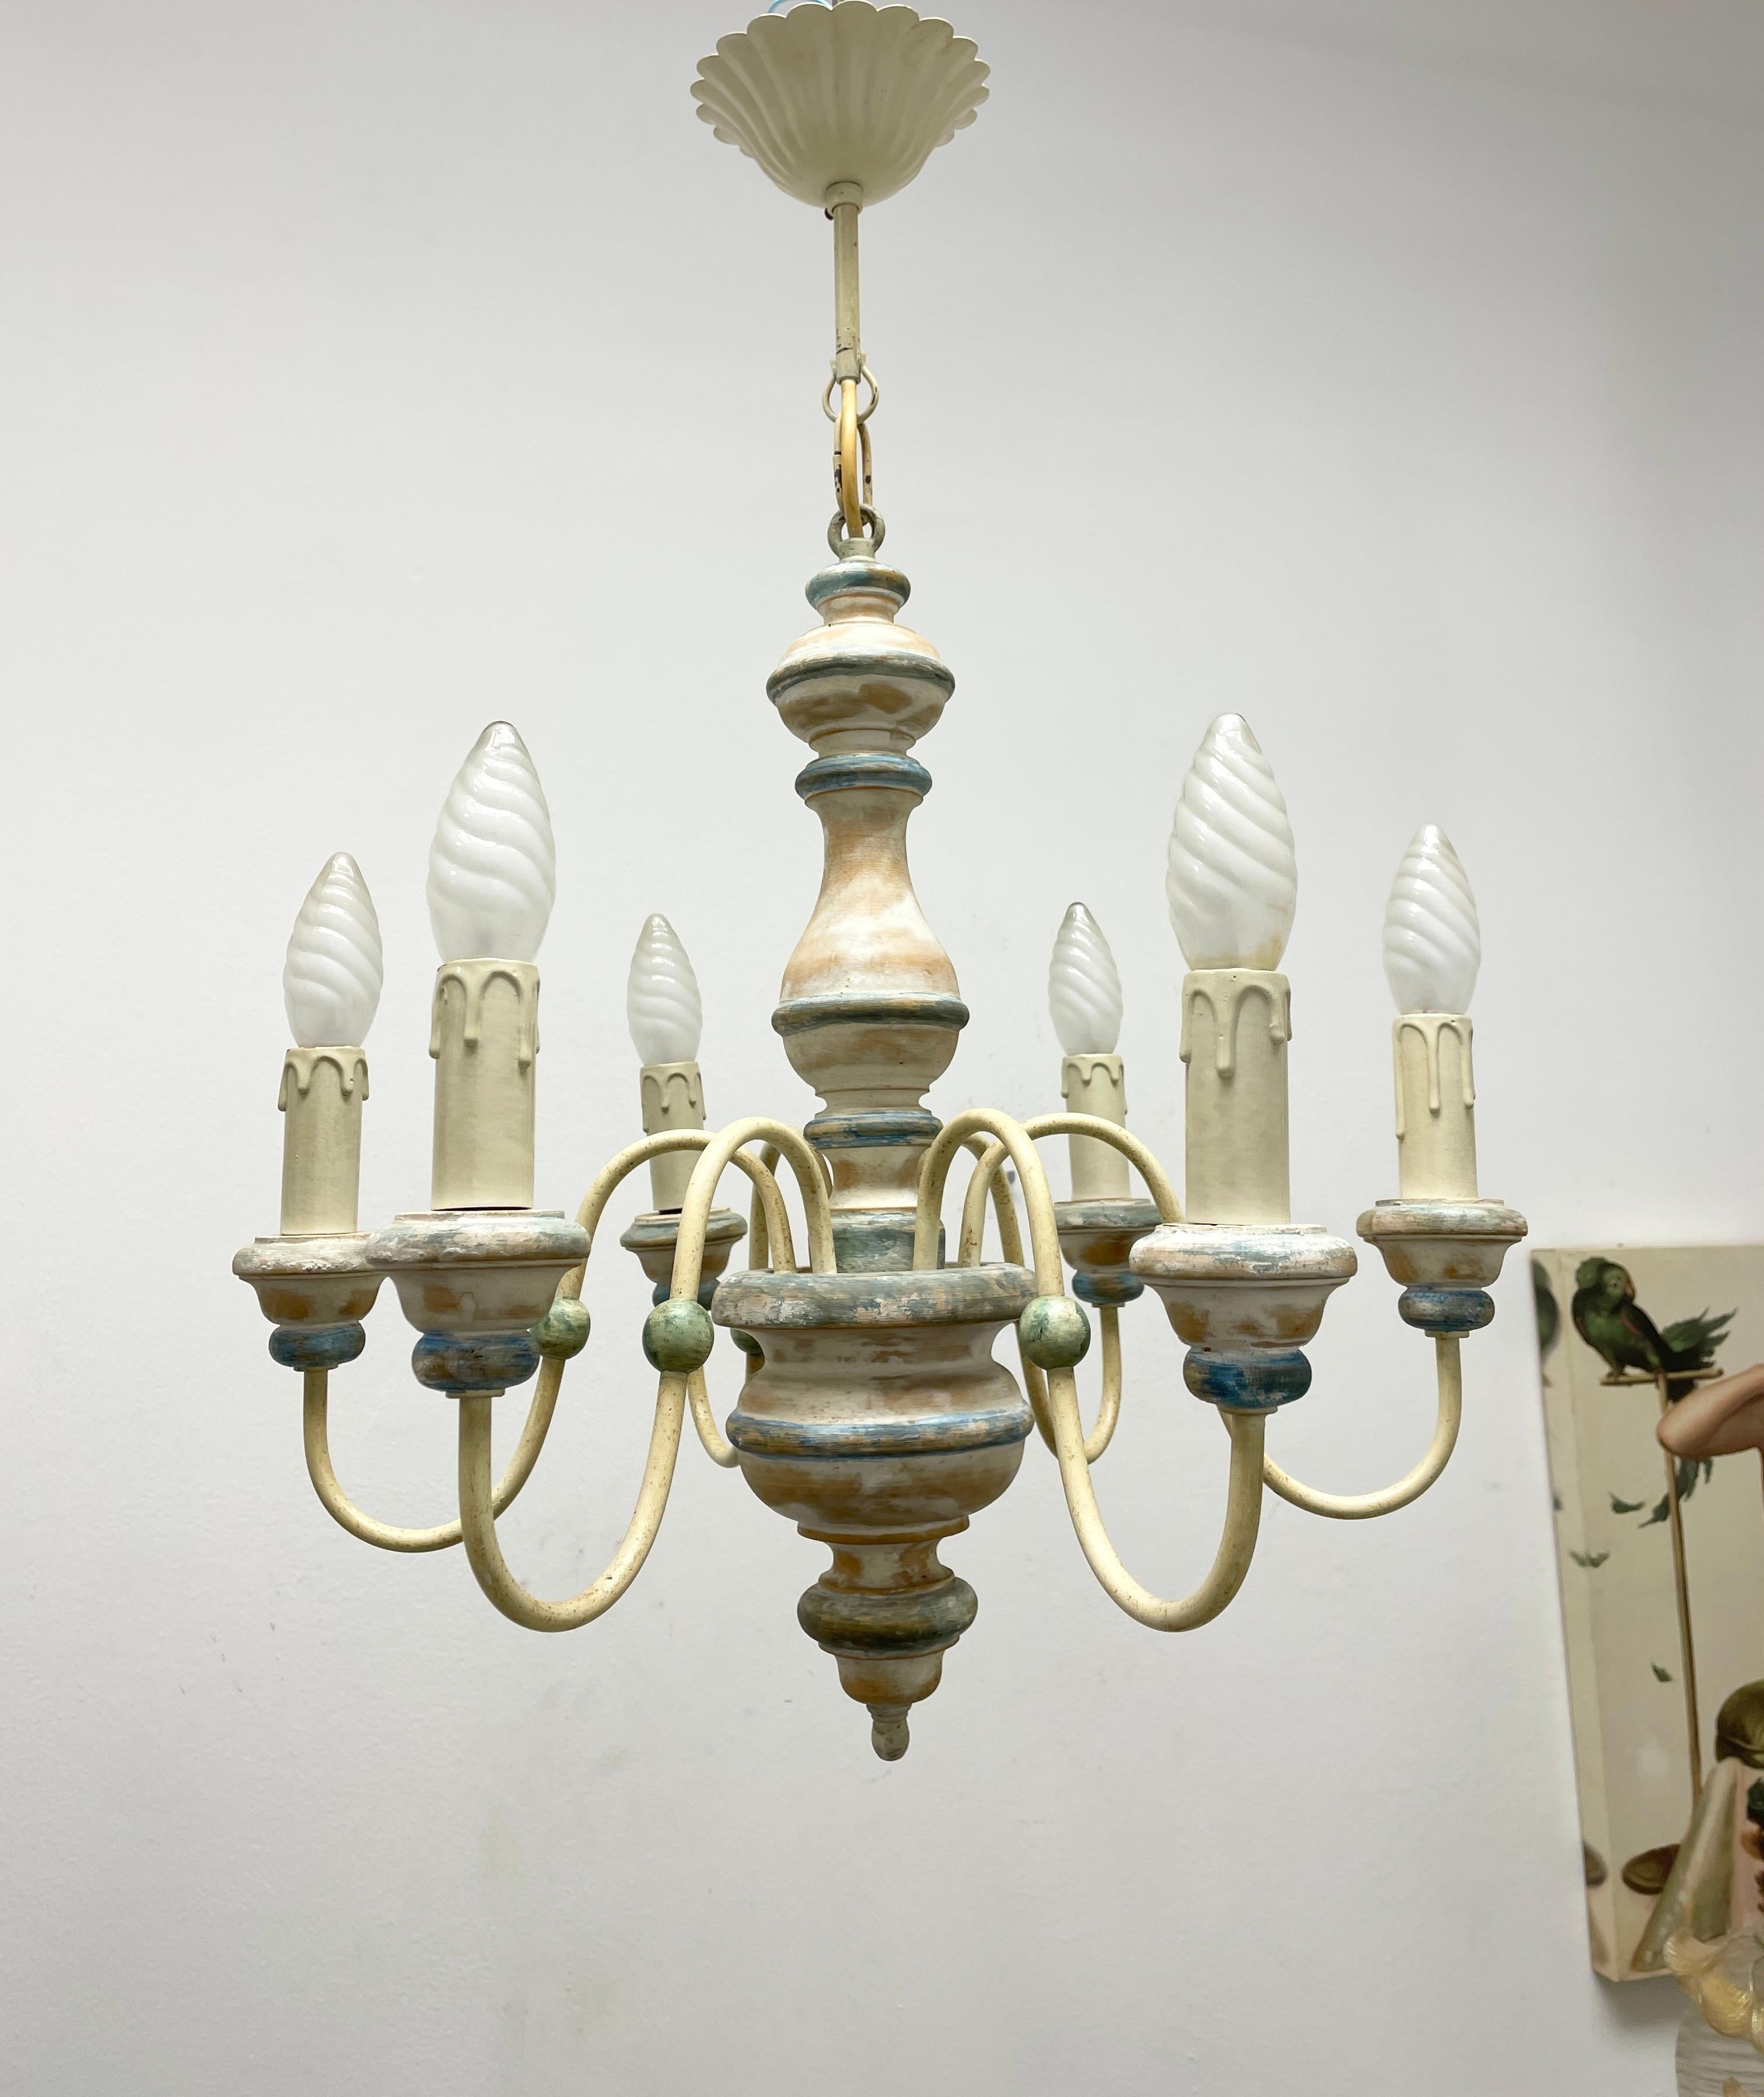 Add a touch of opulence to your home with this charming chandelier! Perfect wood and metal chandelier to enhance any chic or eclectic home. The beautiful chippy white and blue colors give this chandelier a characterful expression. We'd love to see